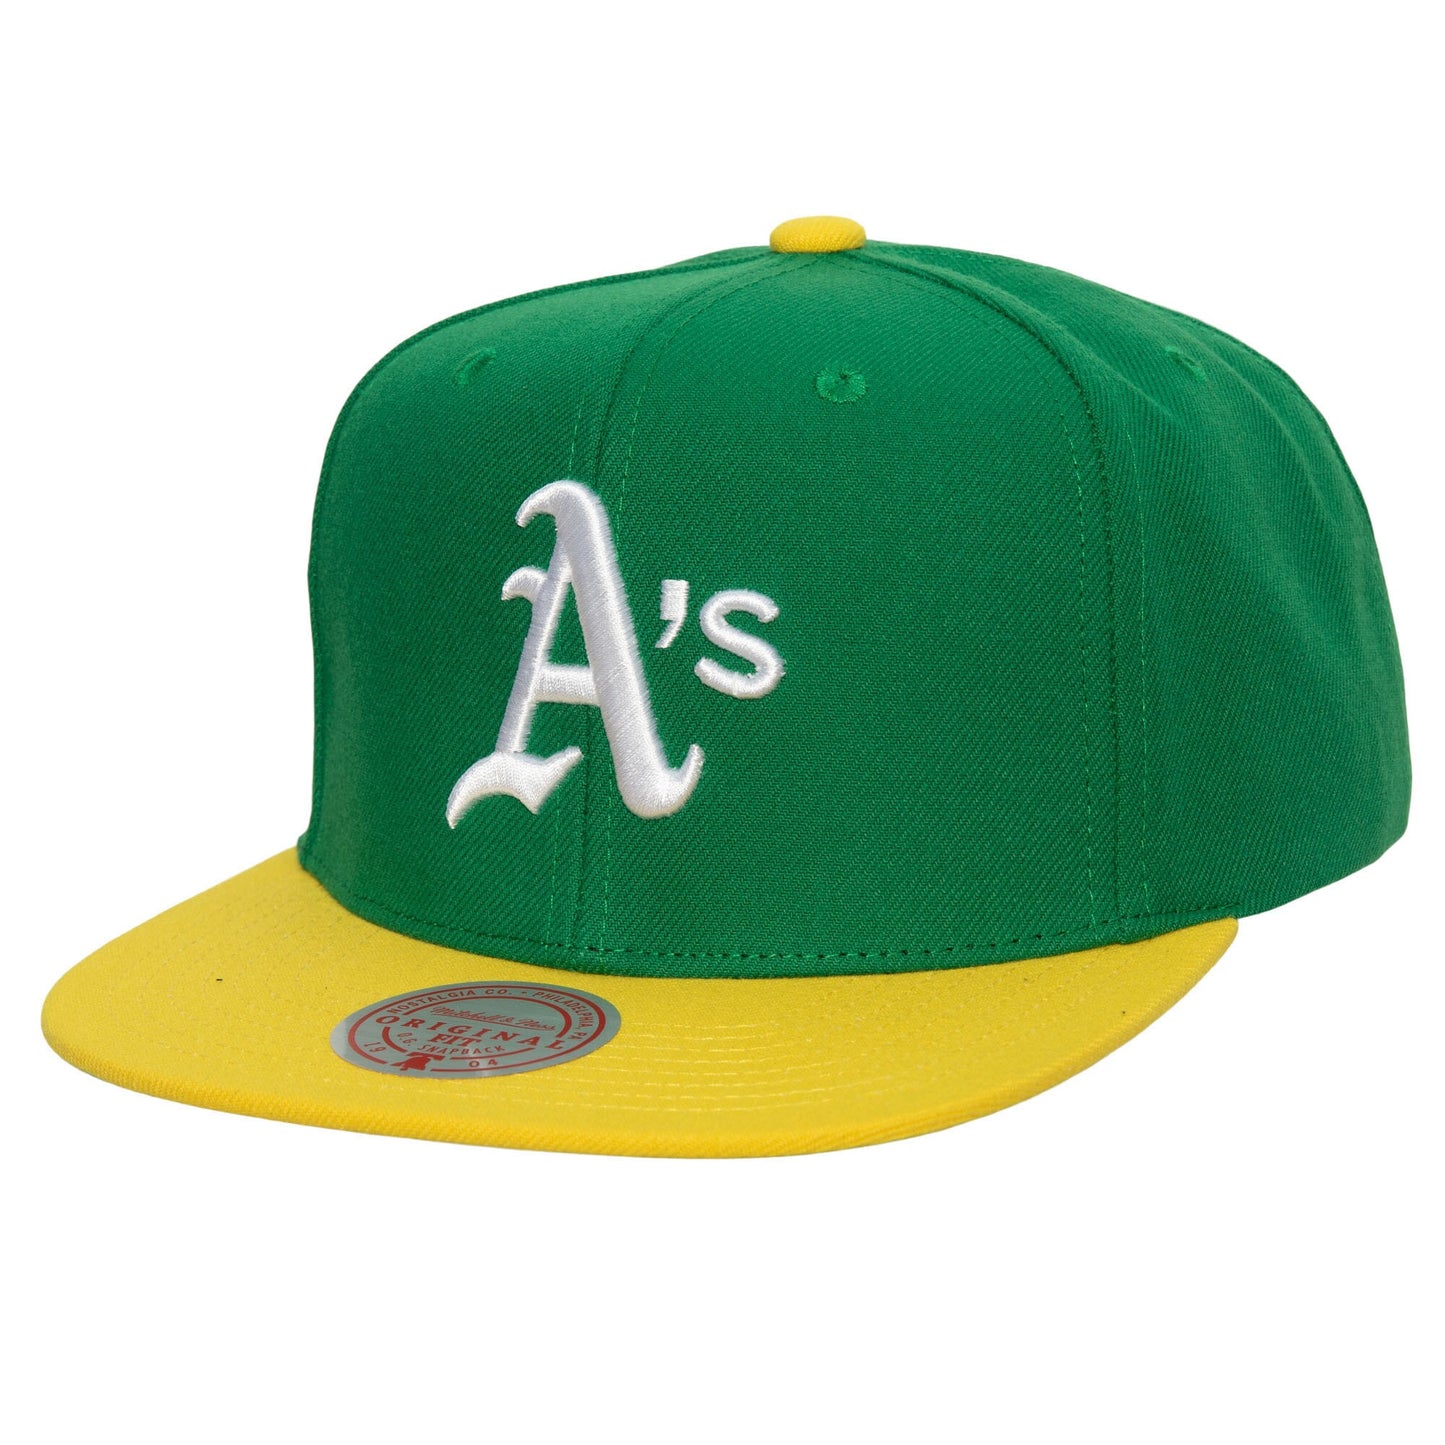 Oakland Athletics Mitchell & Ness Cooperstown Collection Evergreen Snapback Hat - Green